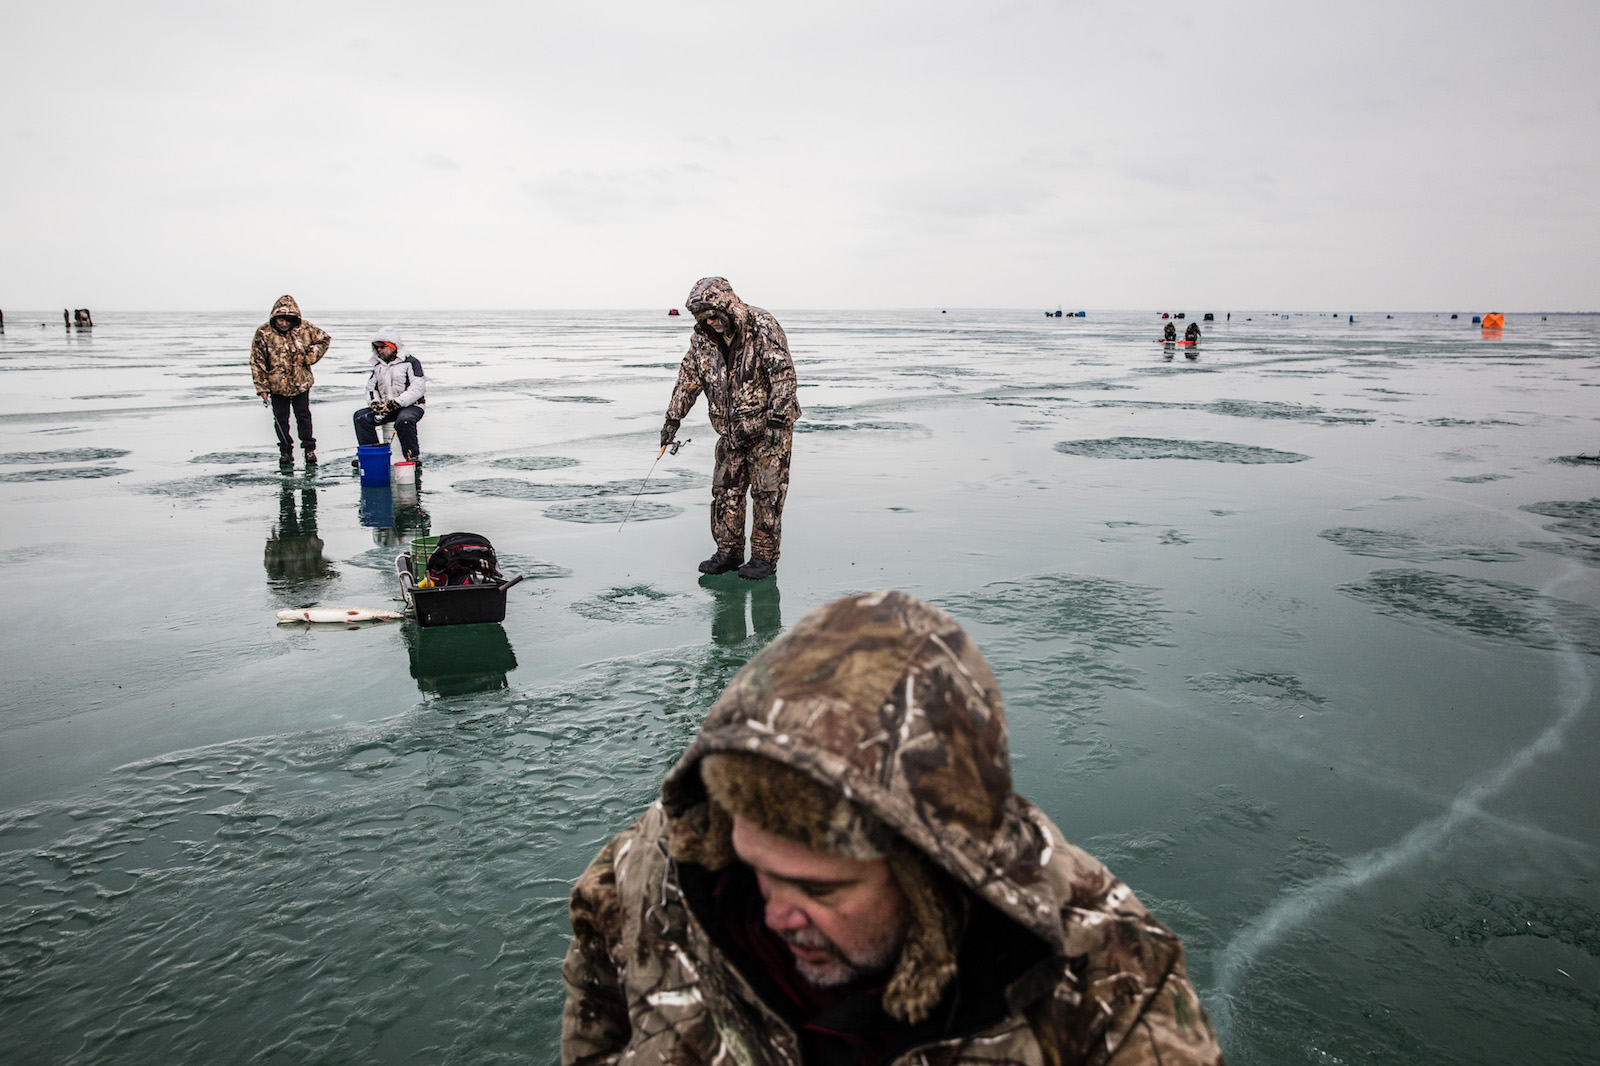 a group of people in camo gather on watery ice bending over buckets and holding fishing poles